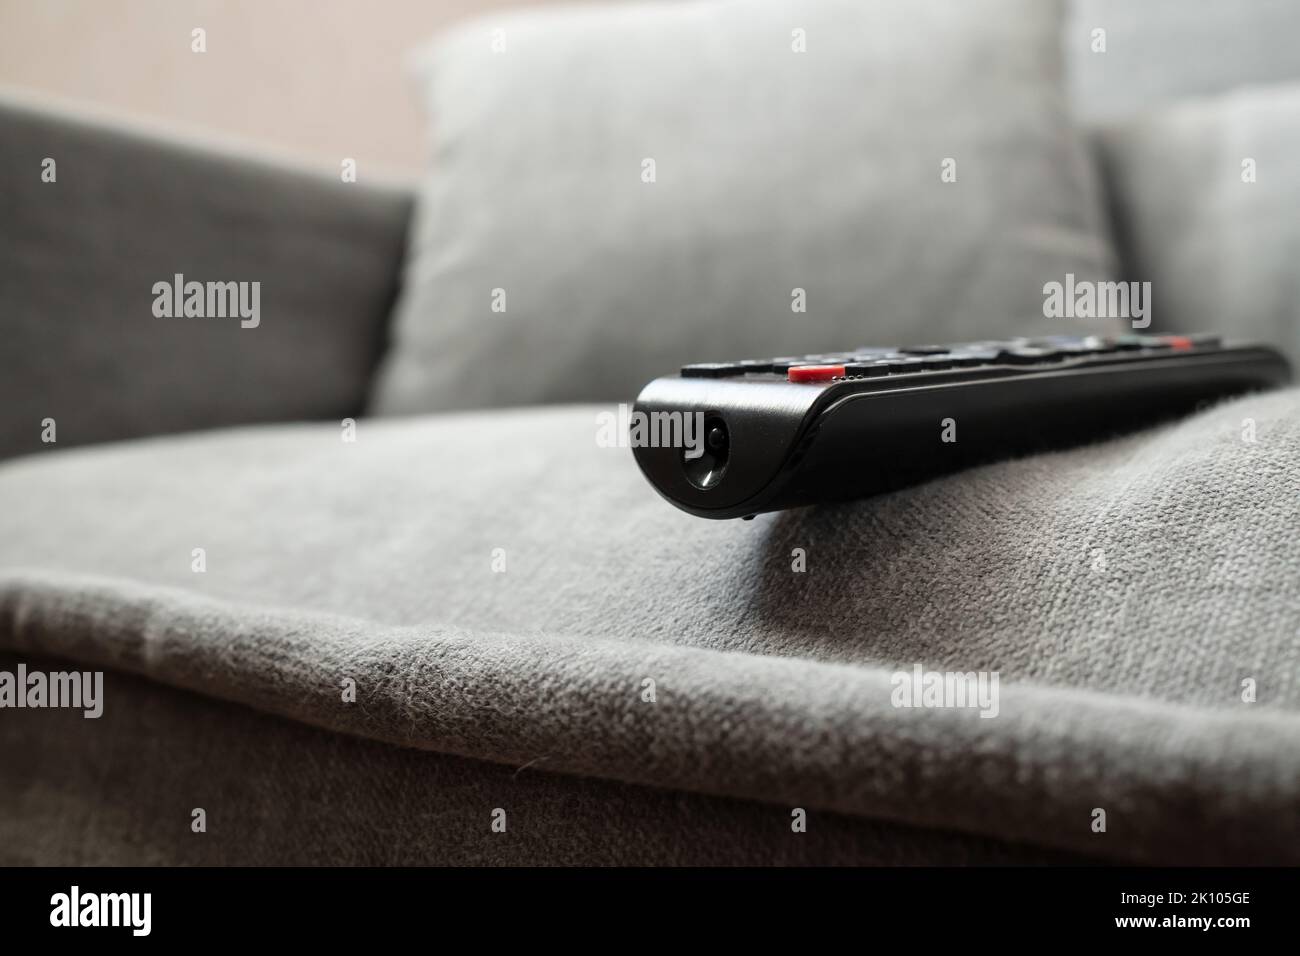 TV remote is accidentally left on the edge of the sofa and may fall. Concept of careless attitude to things.  Stock Photo